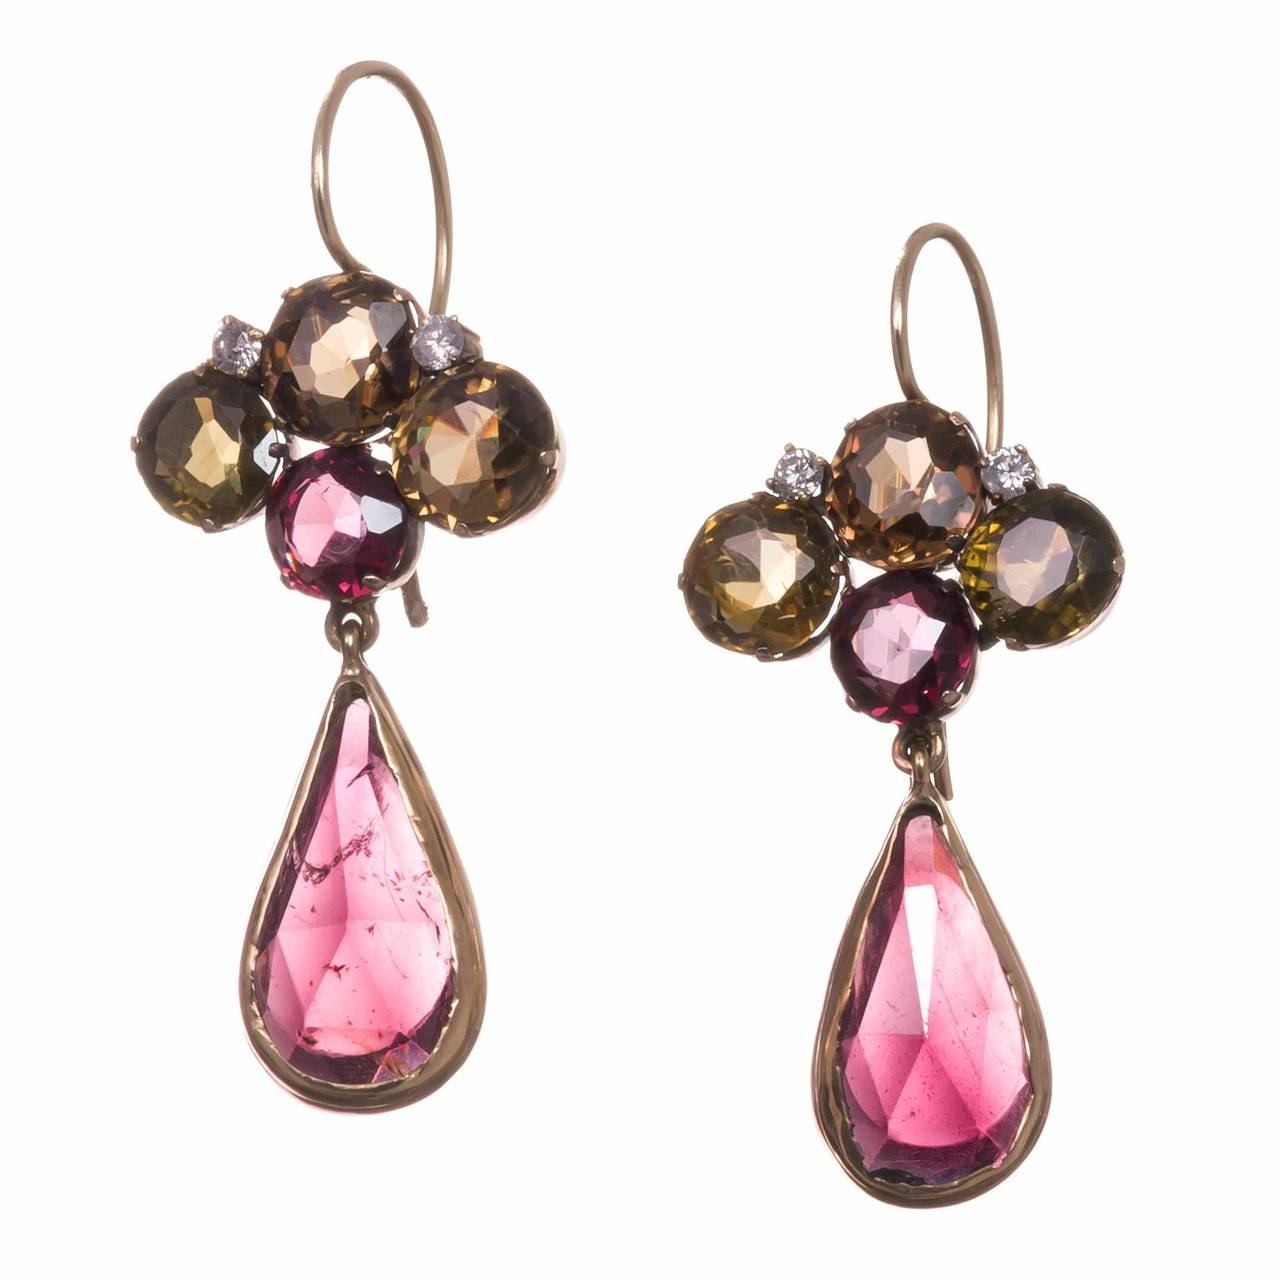 Substantial antique earrings, made of natural color zircons, garnets and diamonds, set in 14k yellow gold. These are from the Arts & Crafts period, made in the US circa 1915. The organic charm of this pair is evident, yet they also possess a subtle